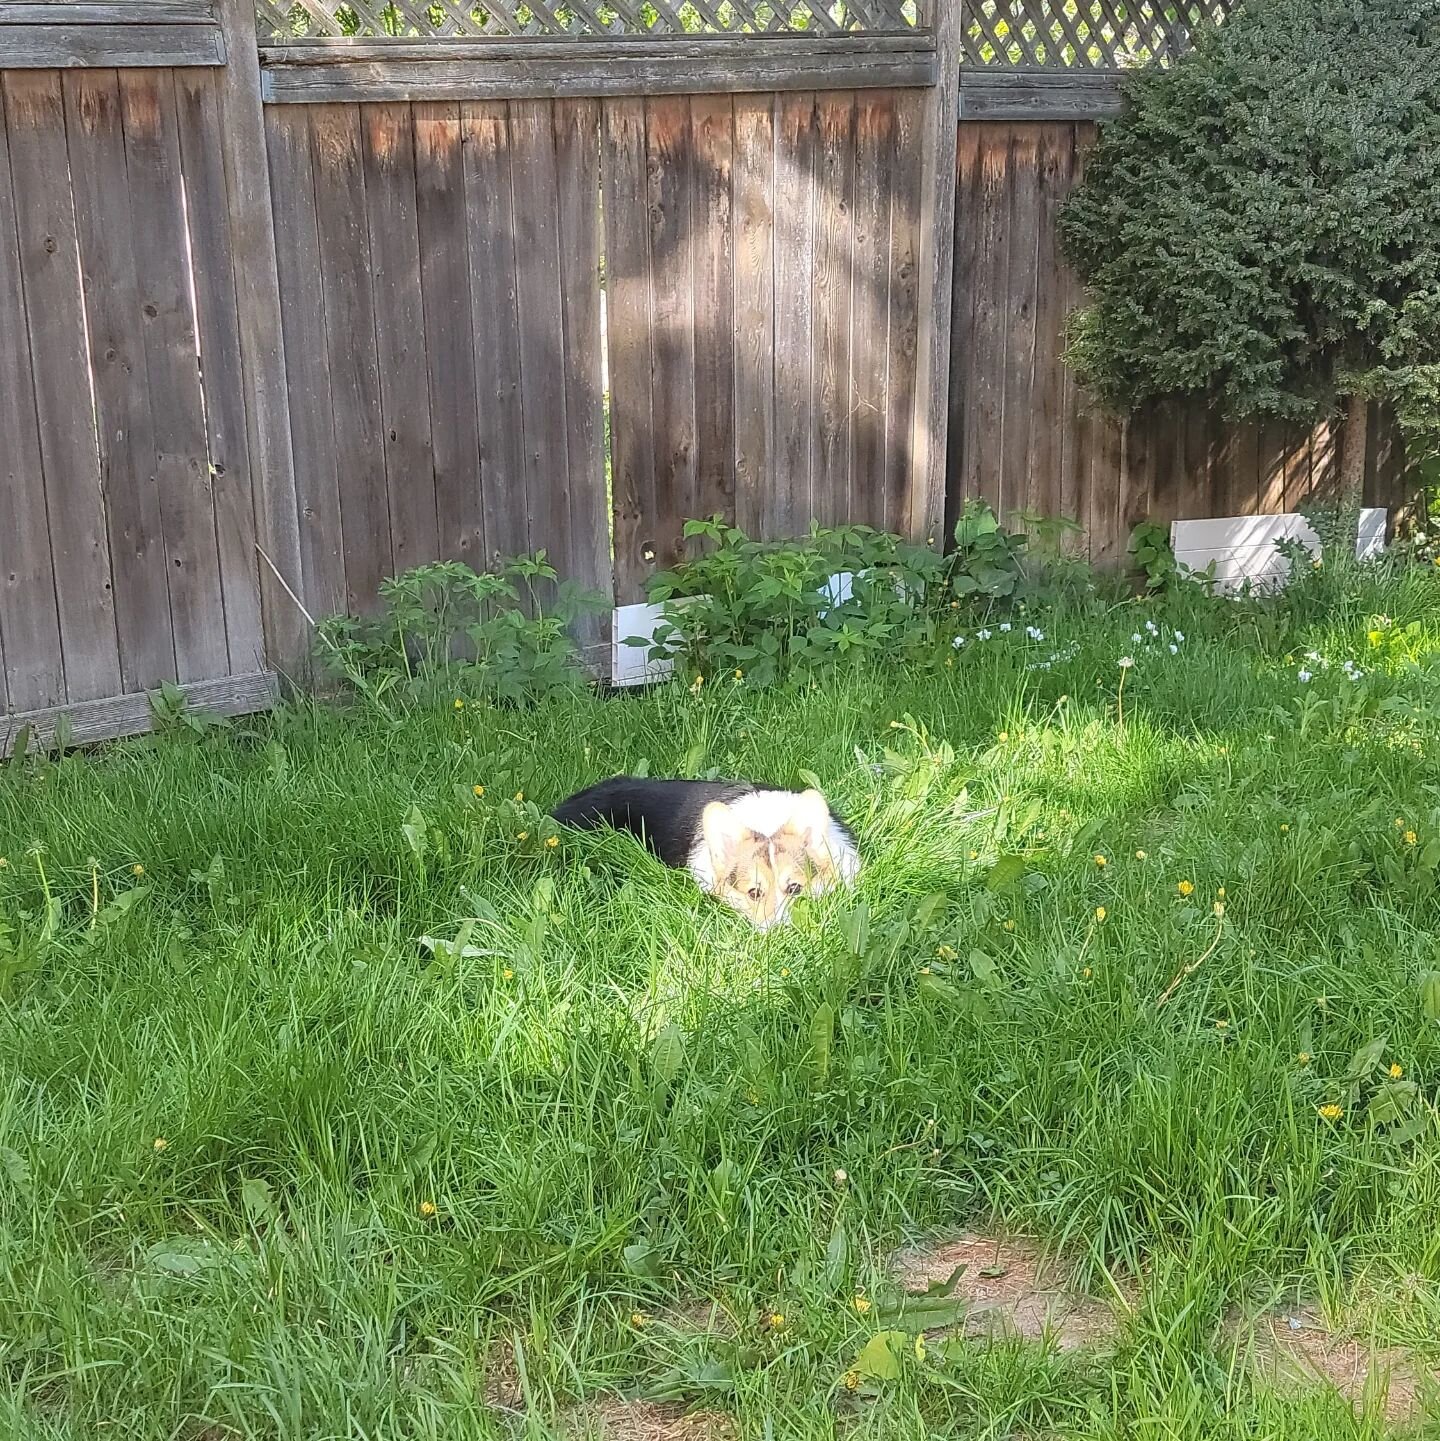 Just a happy corg lying in a sun patch in my unmowed backyard on a calm morning.

Not pictured: sitting with a pen, notebook, cup of coffee, camera, Oxford comma, and a Bluetooth speaker playing some sweet jams 👌✨️

And yes Corgdad is mowing the law